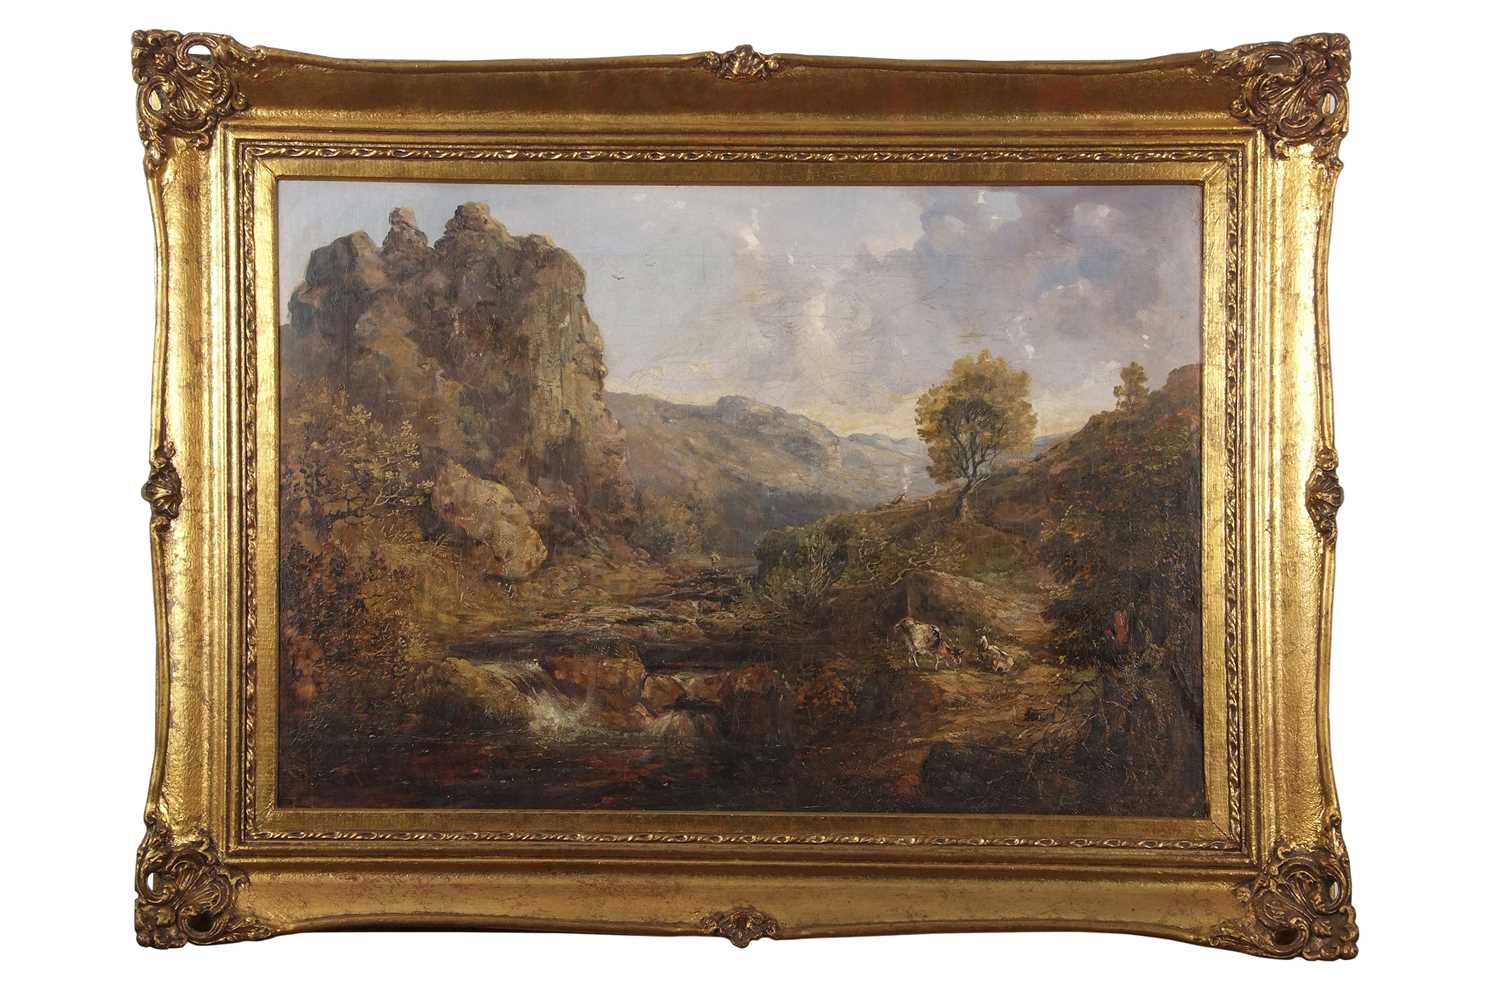 Continental School, circa 19th century, A mountainous landscape scene with figures by a river and - Image 5 of 5